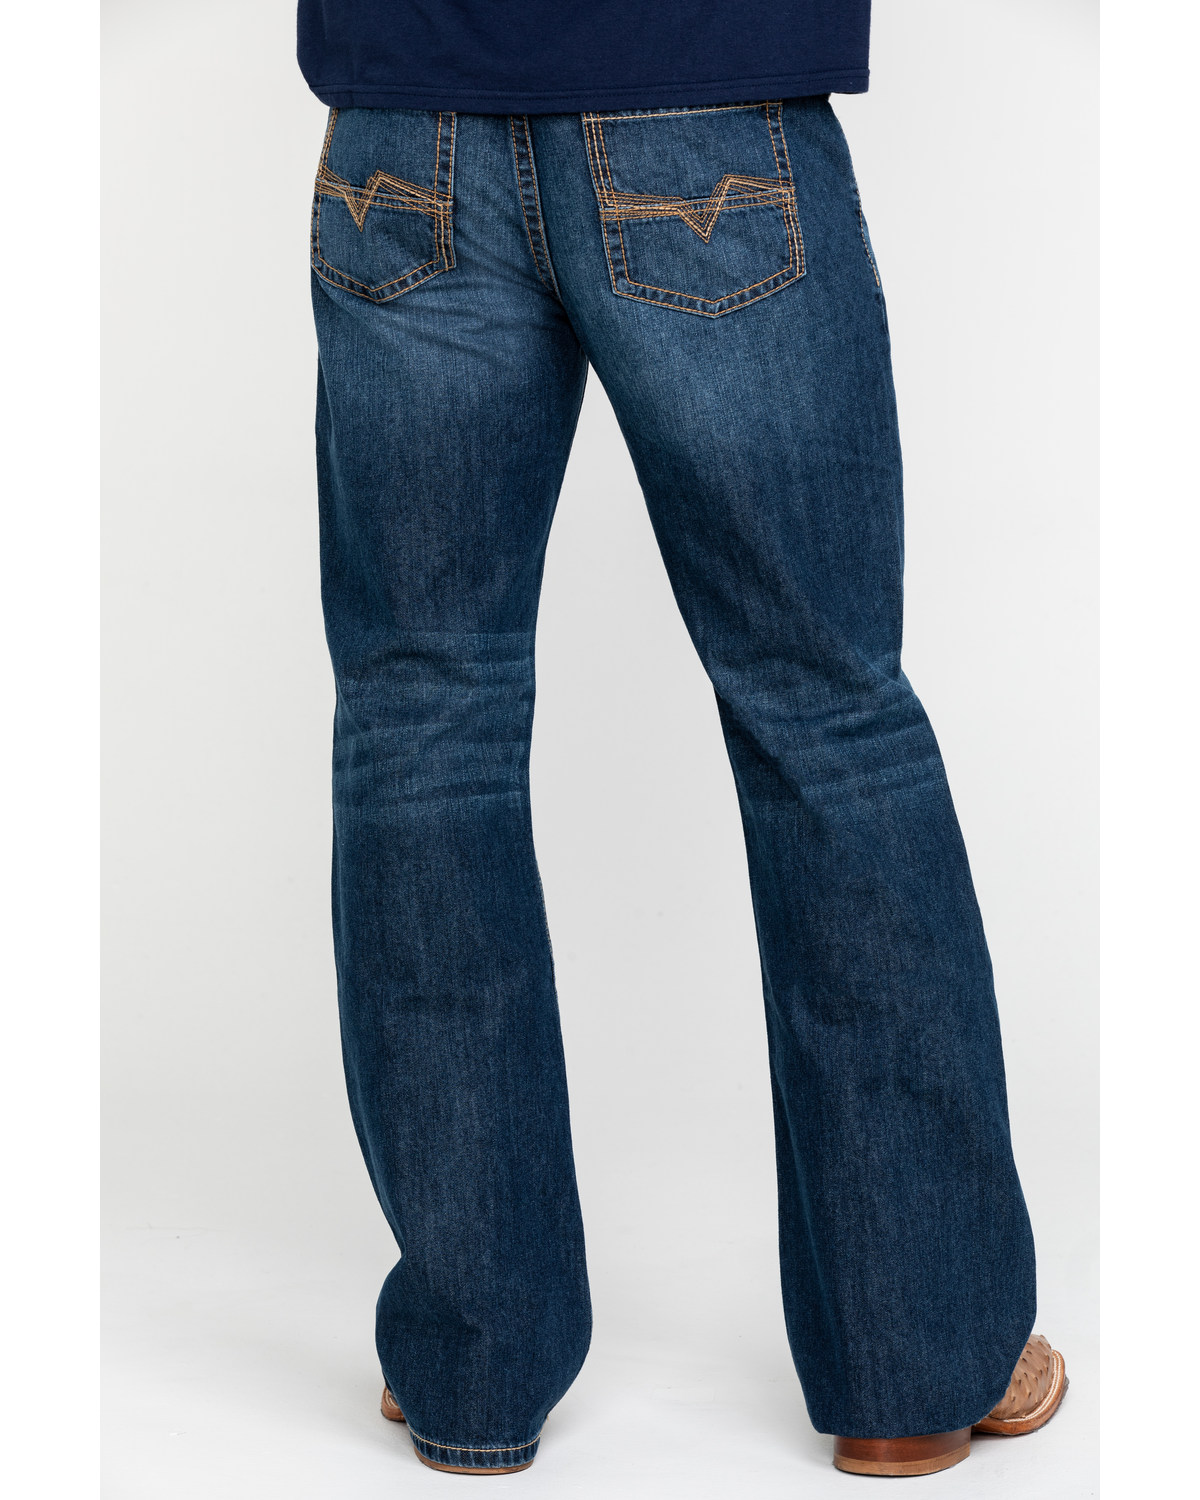 bootcut jeans for sale